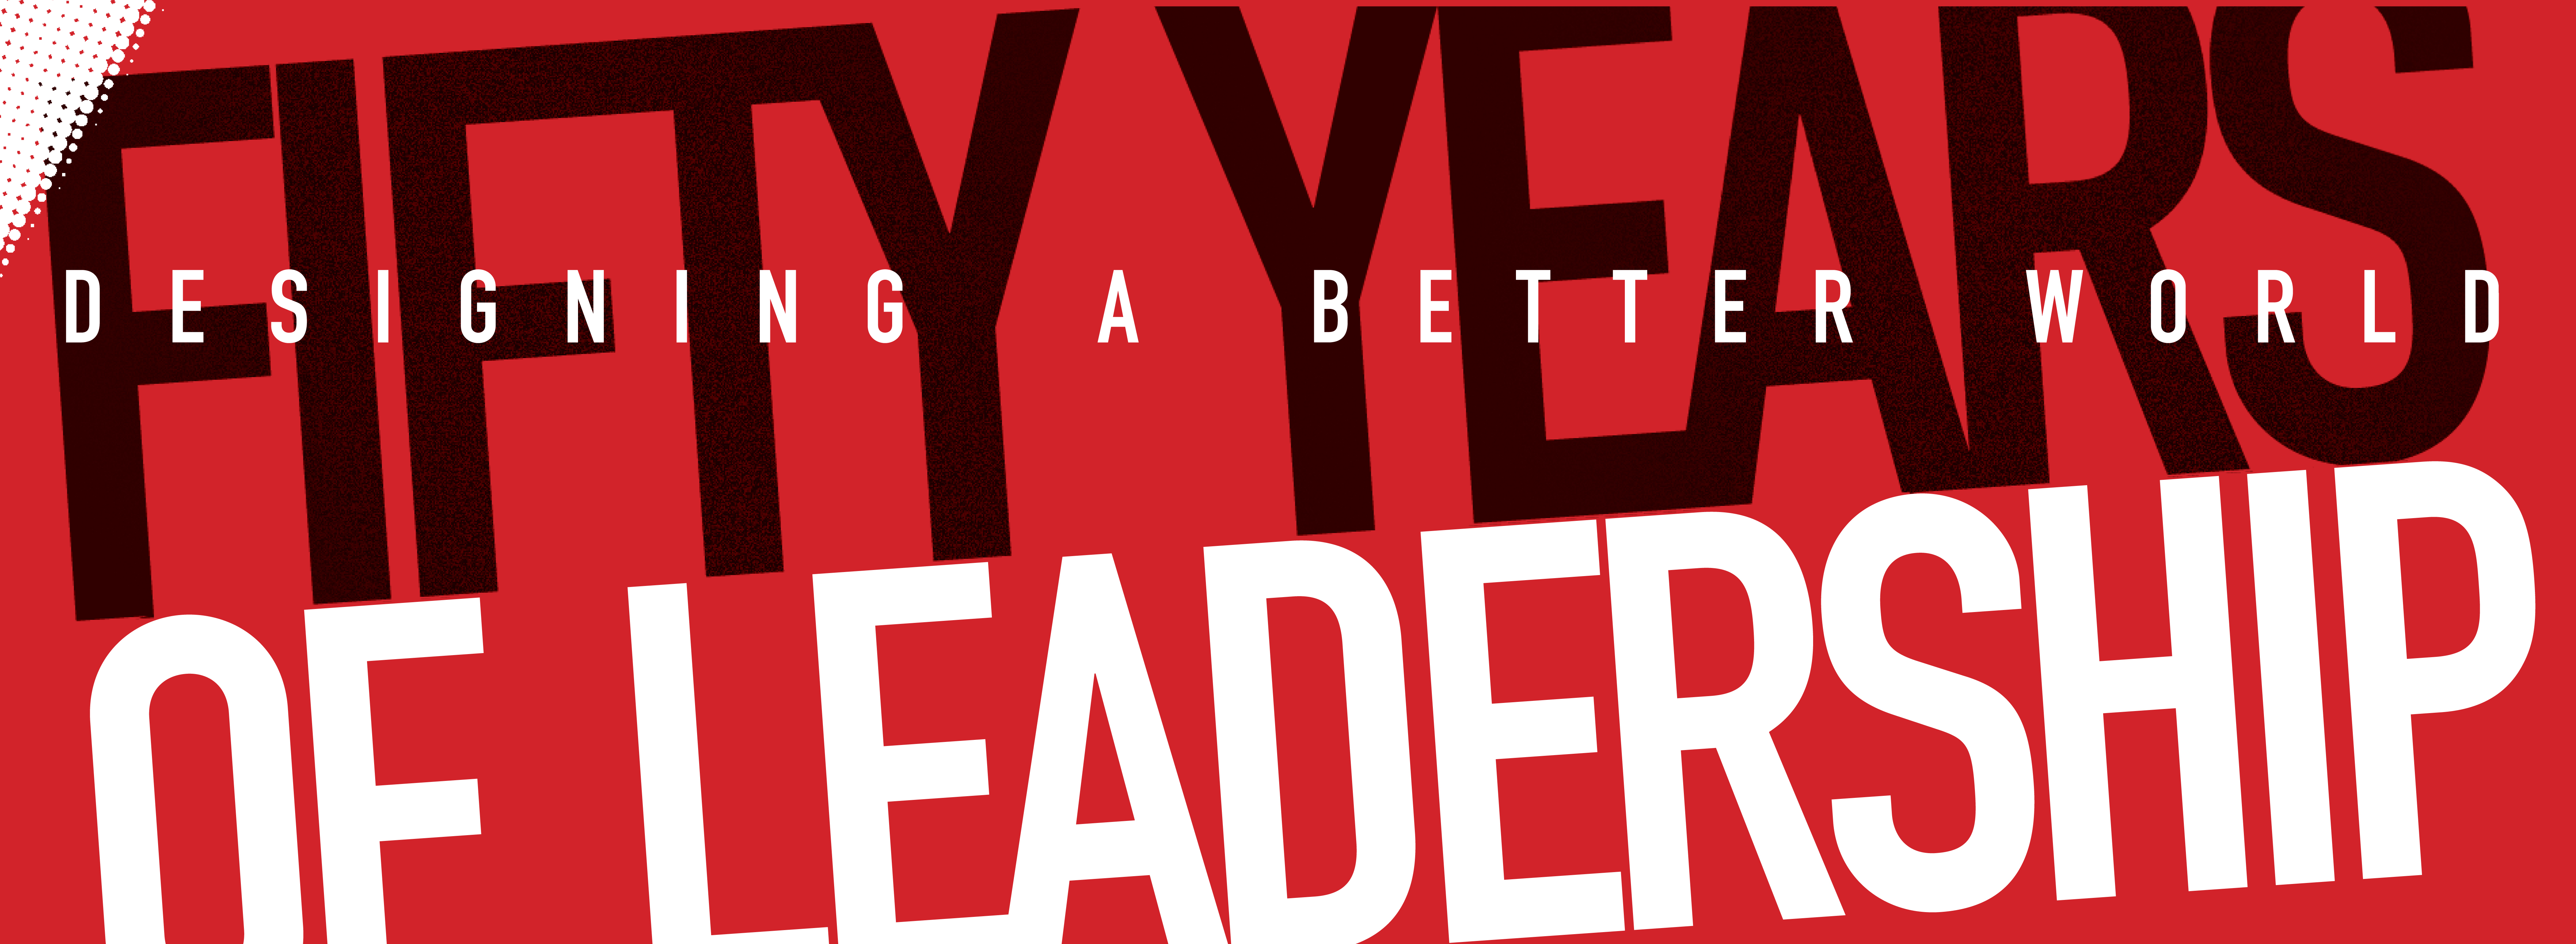 Fifty Years of Leadership: Designing a better future